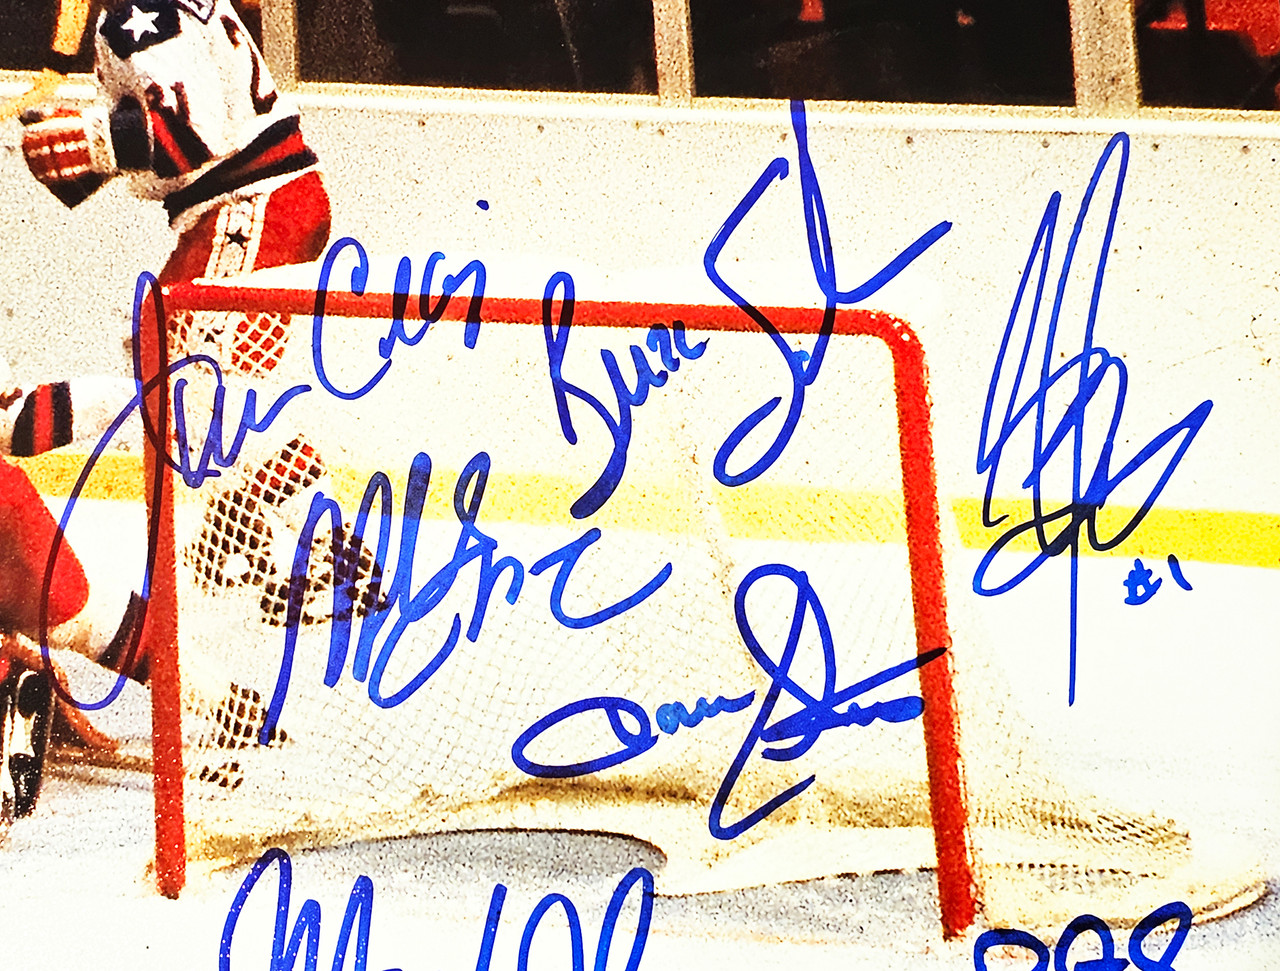 Mike Eruzione Team USA Autographed 16 x 20 Miracle Photograph